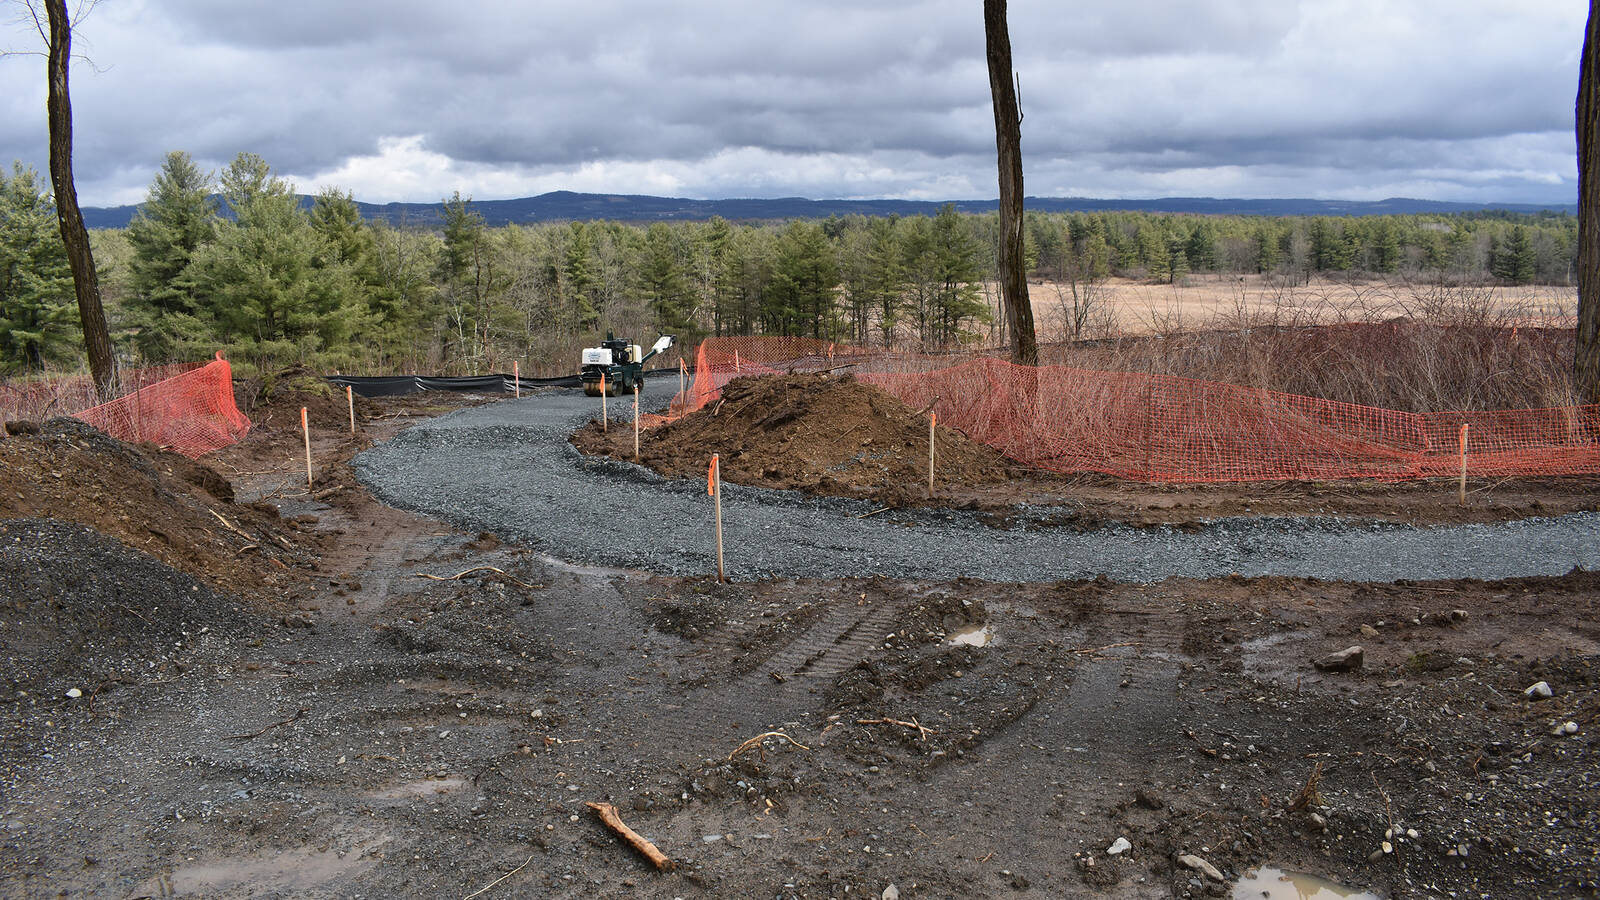 <p>Rehabilitation of the 50-year-old Saratoga Battlefield Tour Road at Saratoga National Historical Park in New York. The project improves the visitor experience by restoring educational waysides, parking, walkways and viewing areas along the 10-mile route. </p>